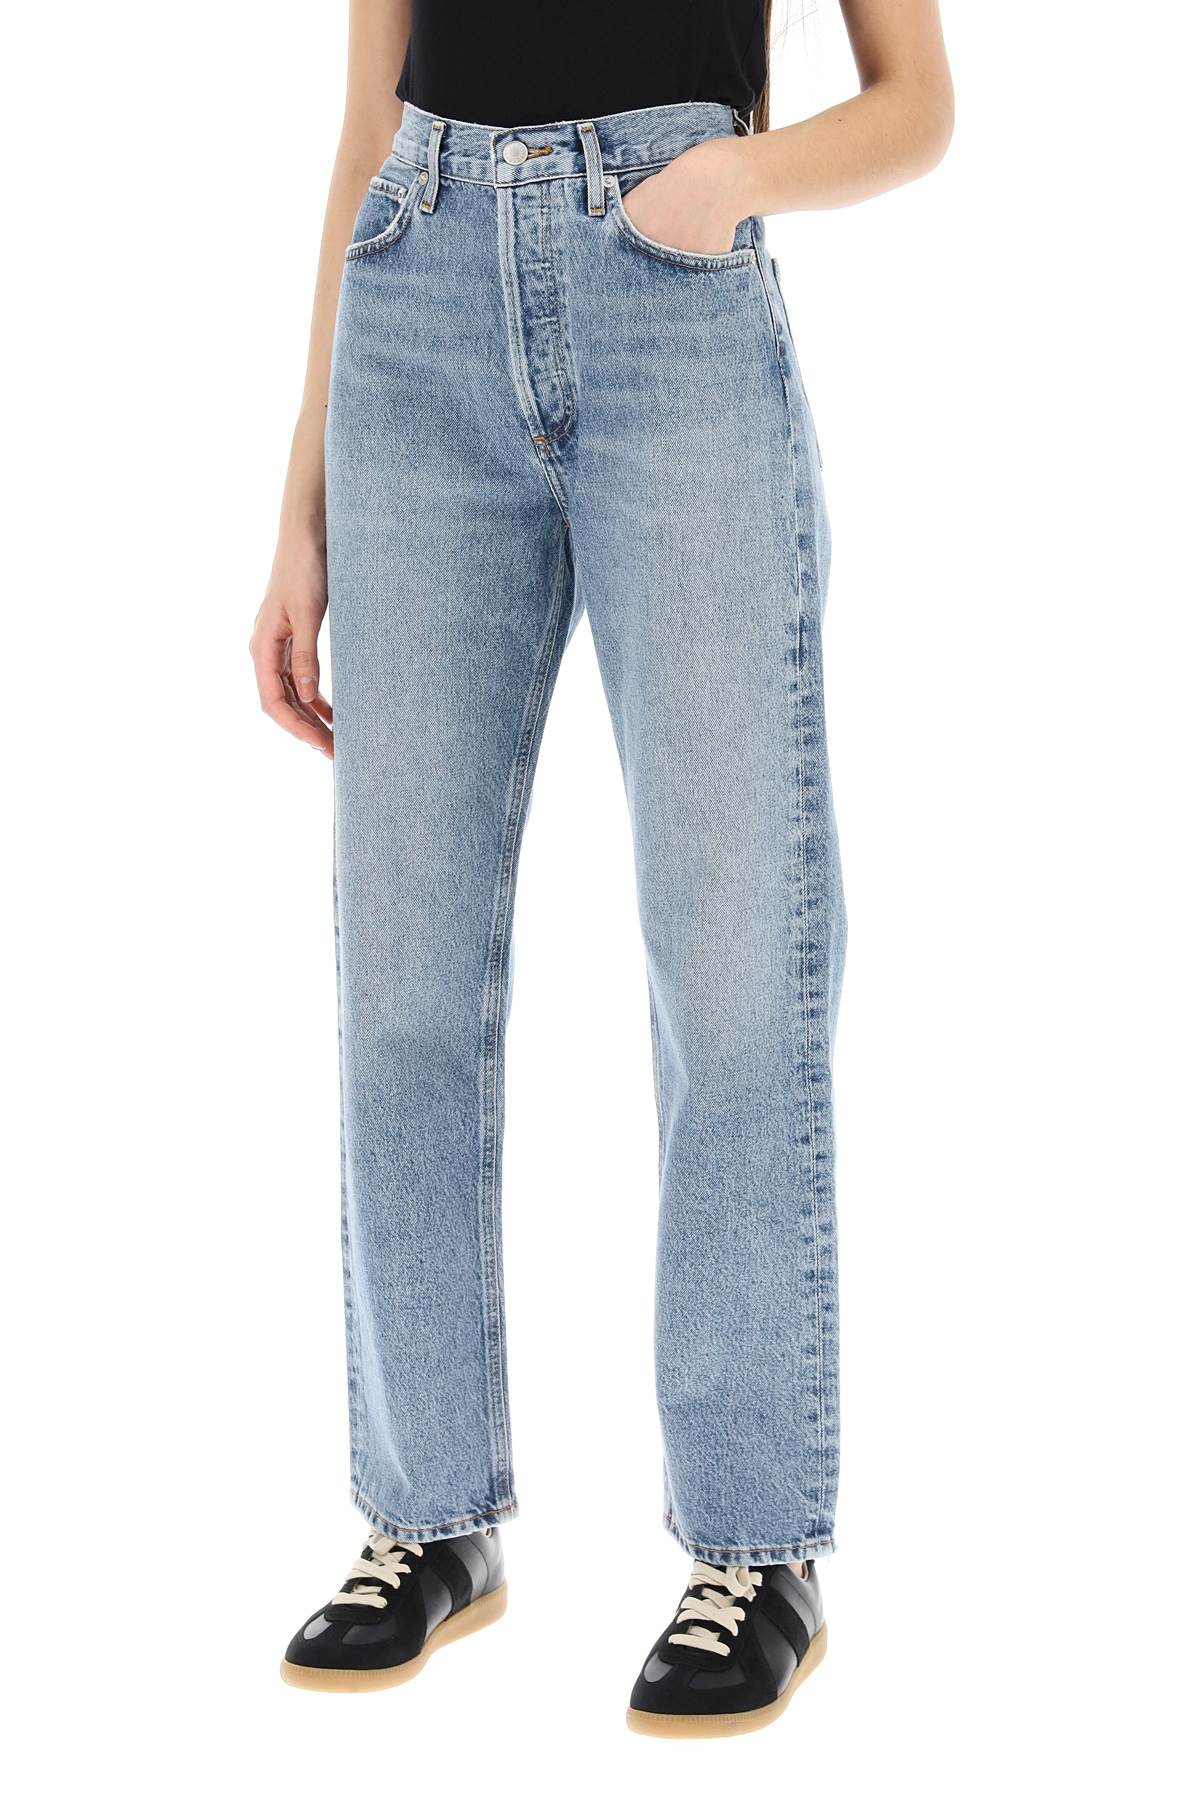 Agolde straight leg jeans from the 90's with high waist-3